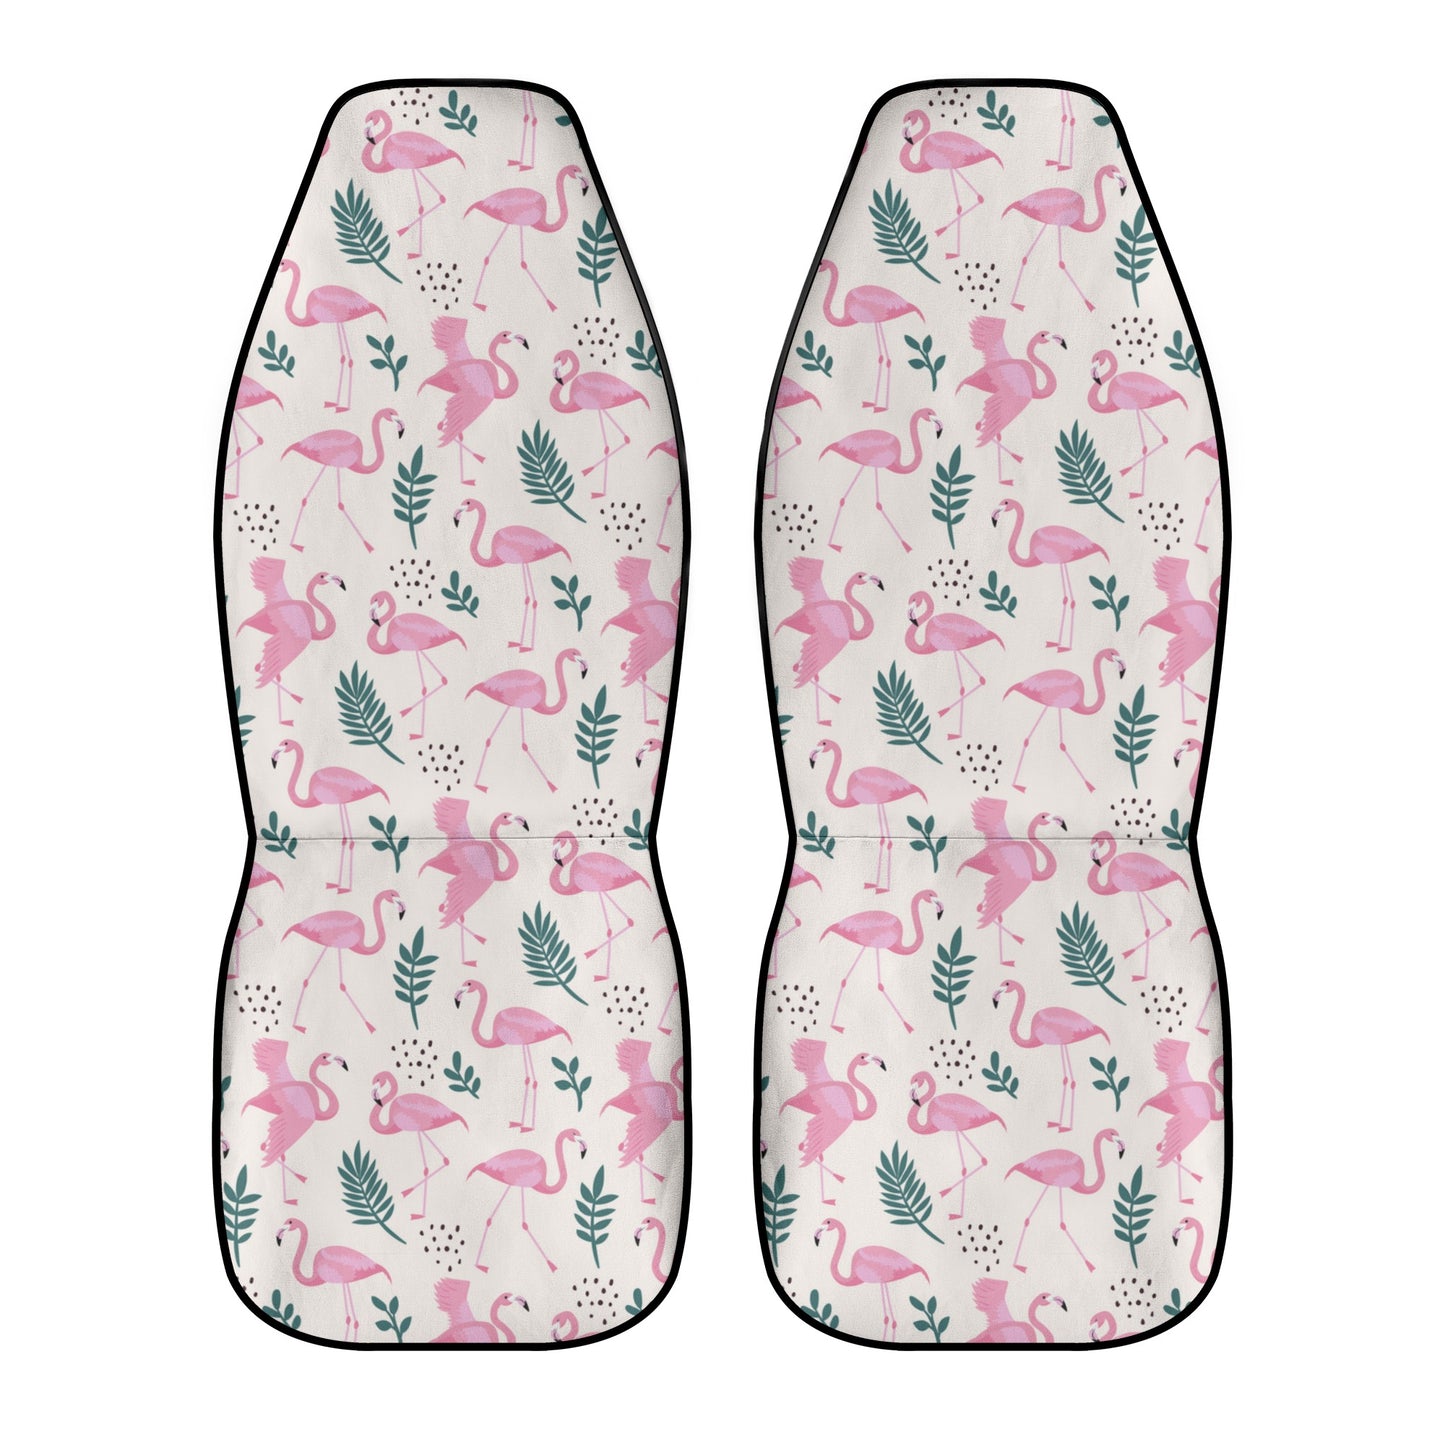 Pink Flamingo Car Seat Covers (2 pcs), Tropical Pattern Front Seat Dog Vehicle SUV Universal Protector Accessory Men Women